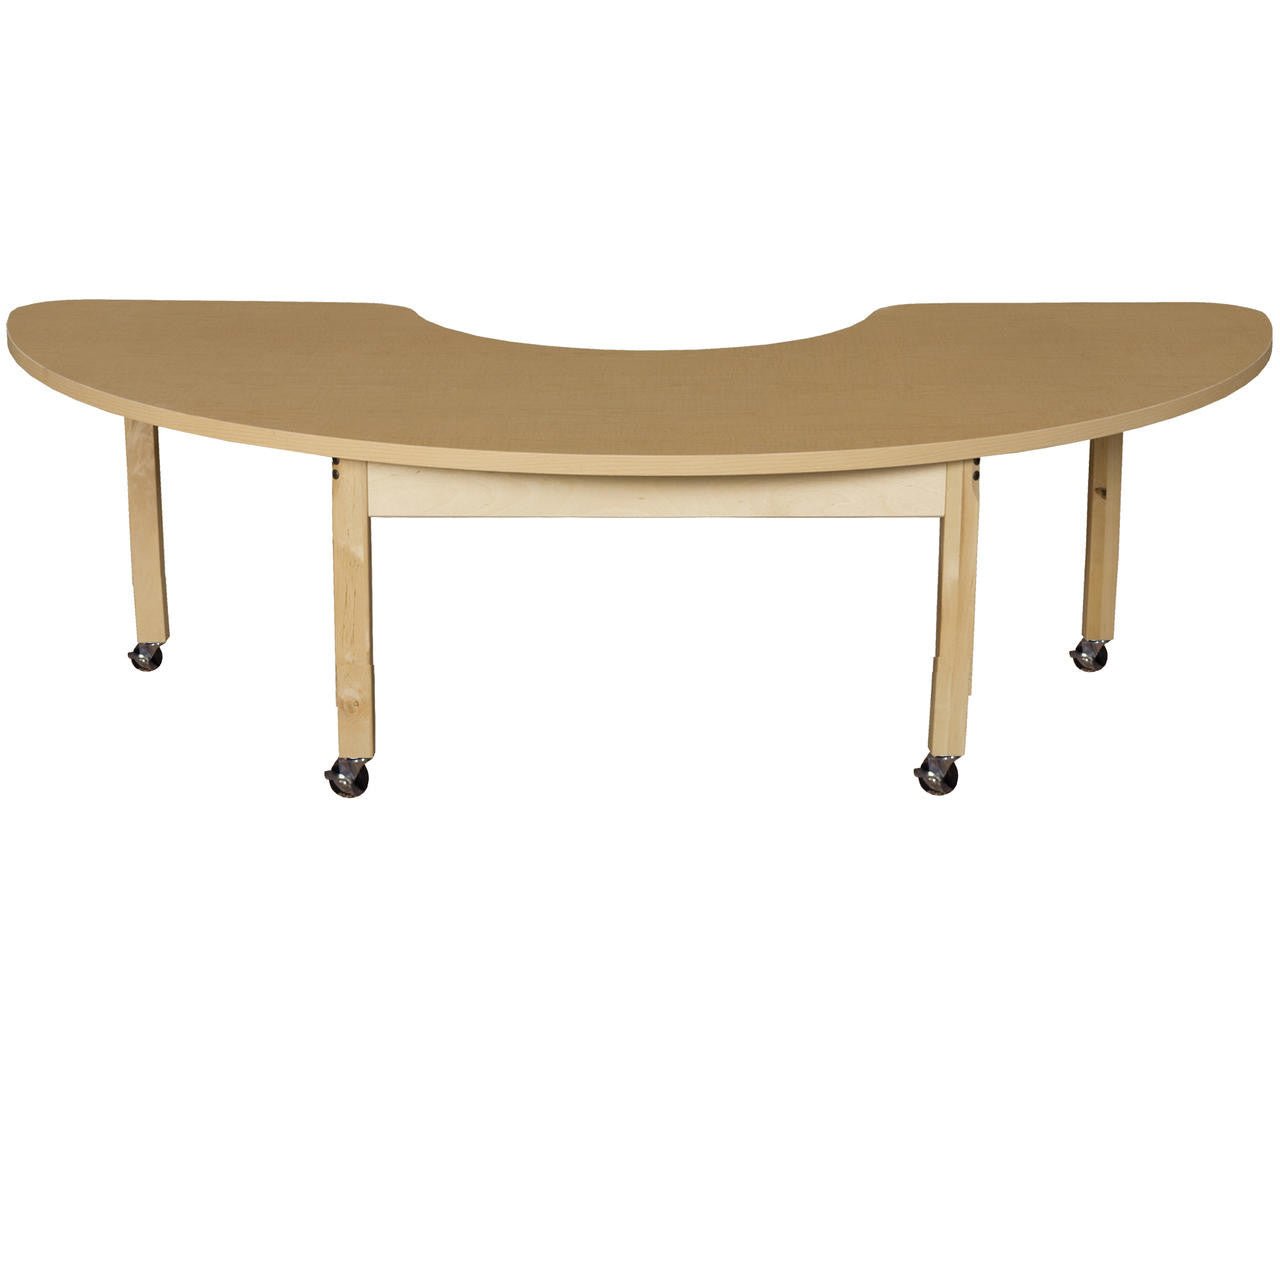 Half Circle High Pressure Laminate Table with Locking Caster- 76 x 24